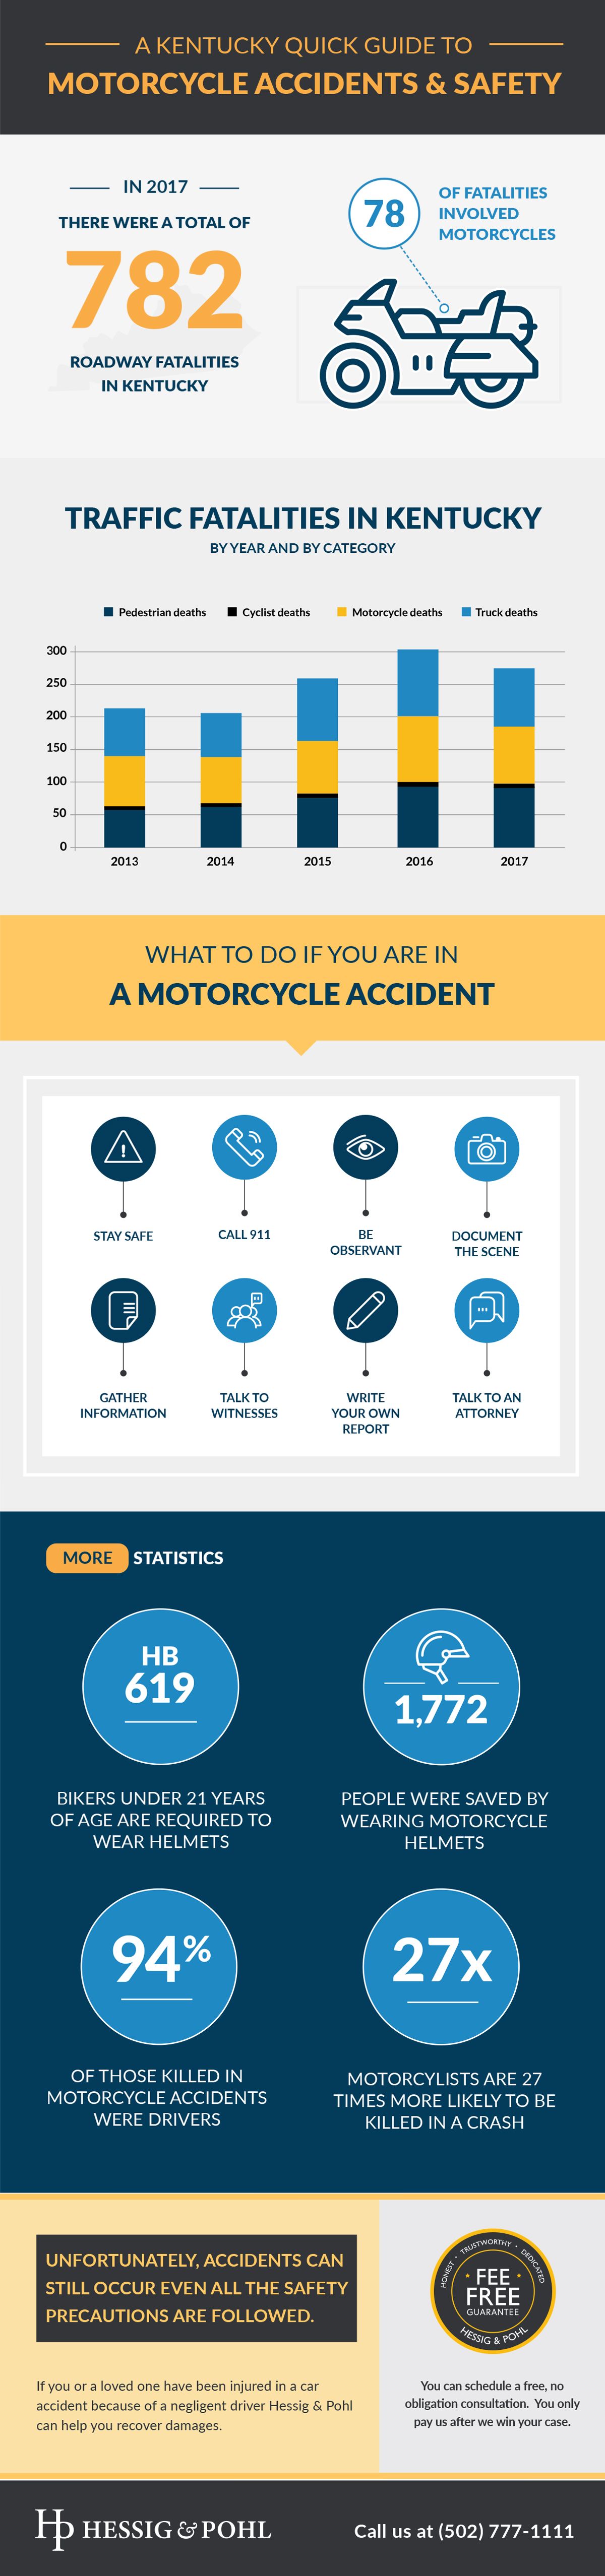 Louisville Motorcycle Accident Infographic